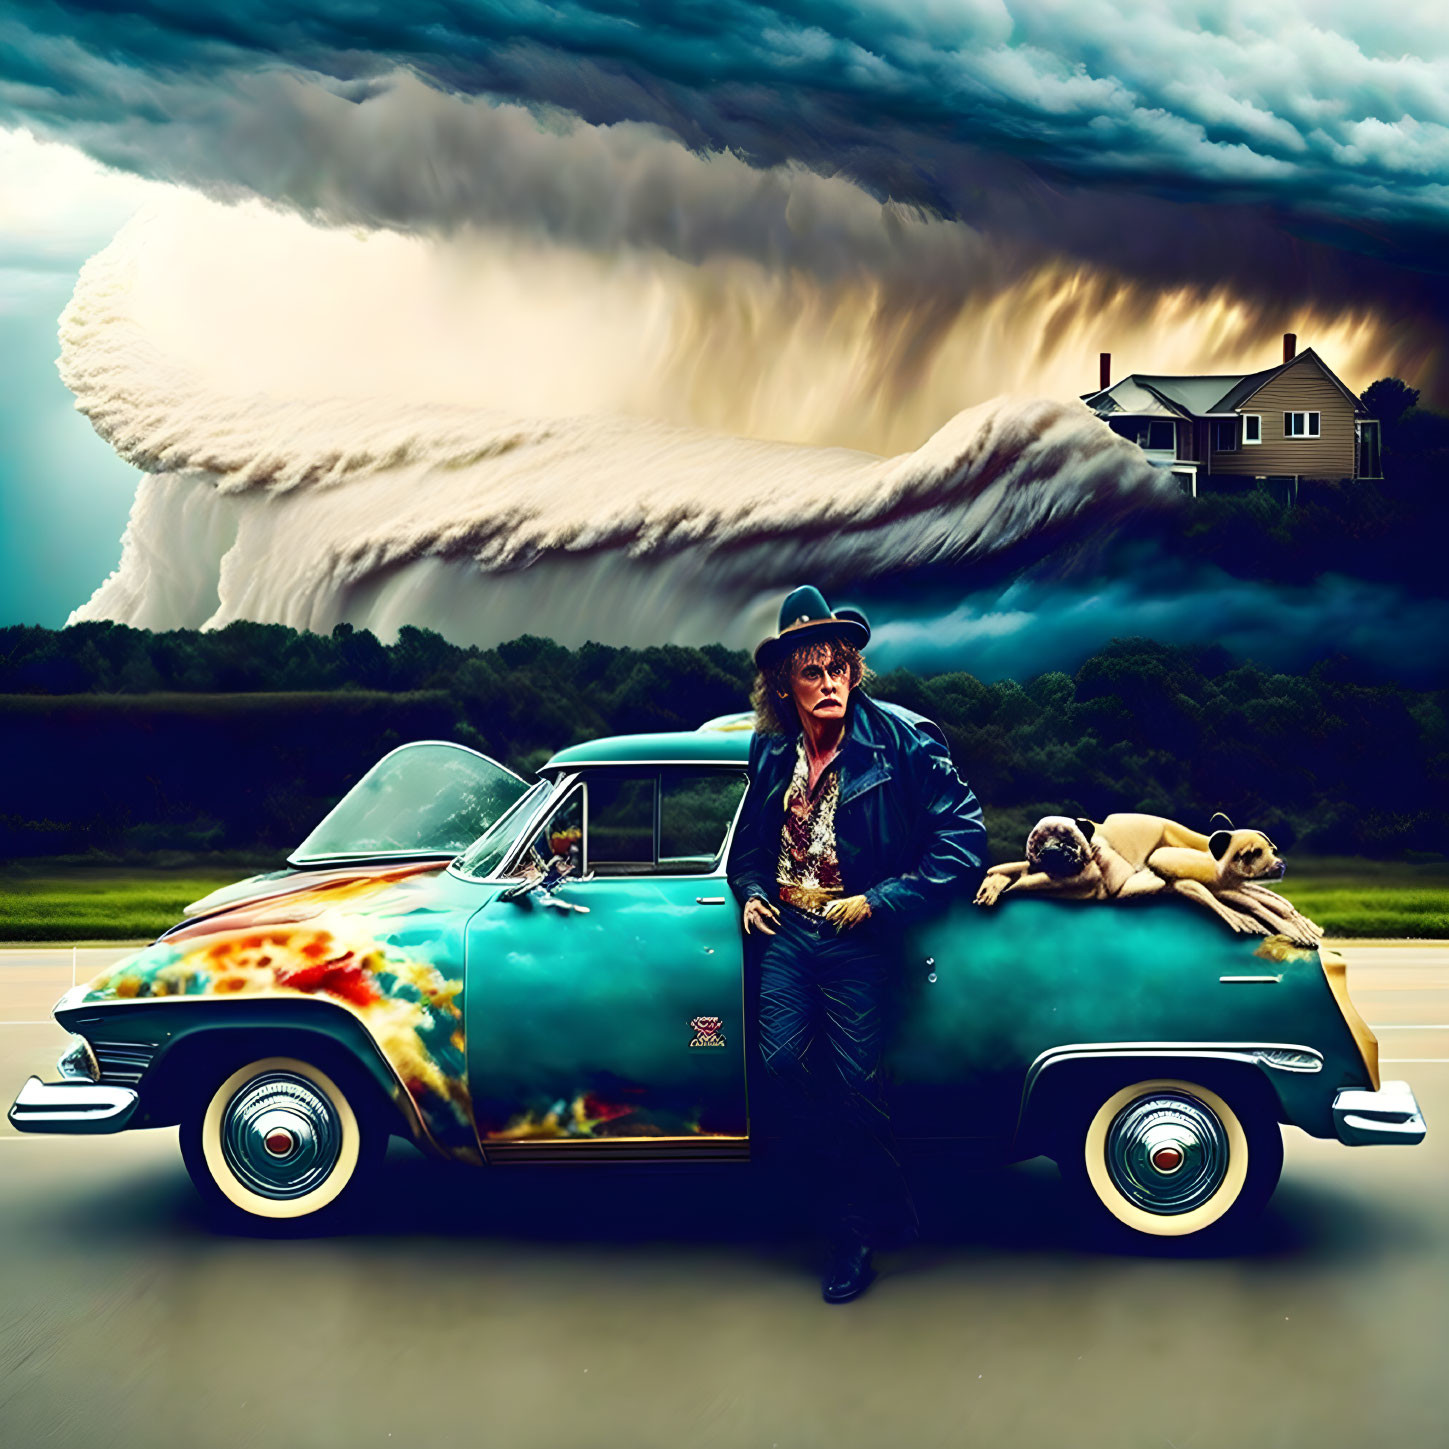 Man in leather jacket with dogs by classic car under dramatic sky